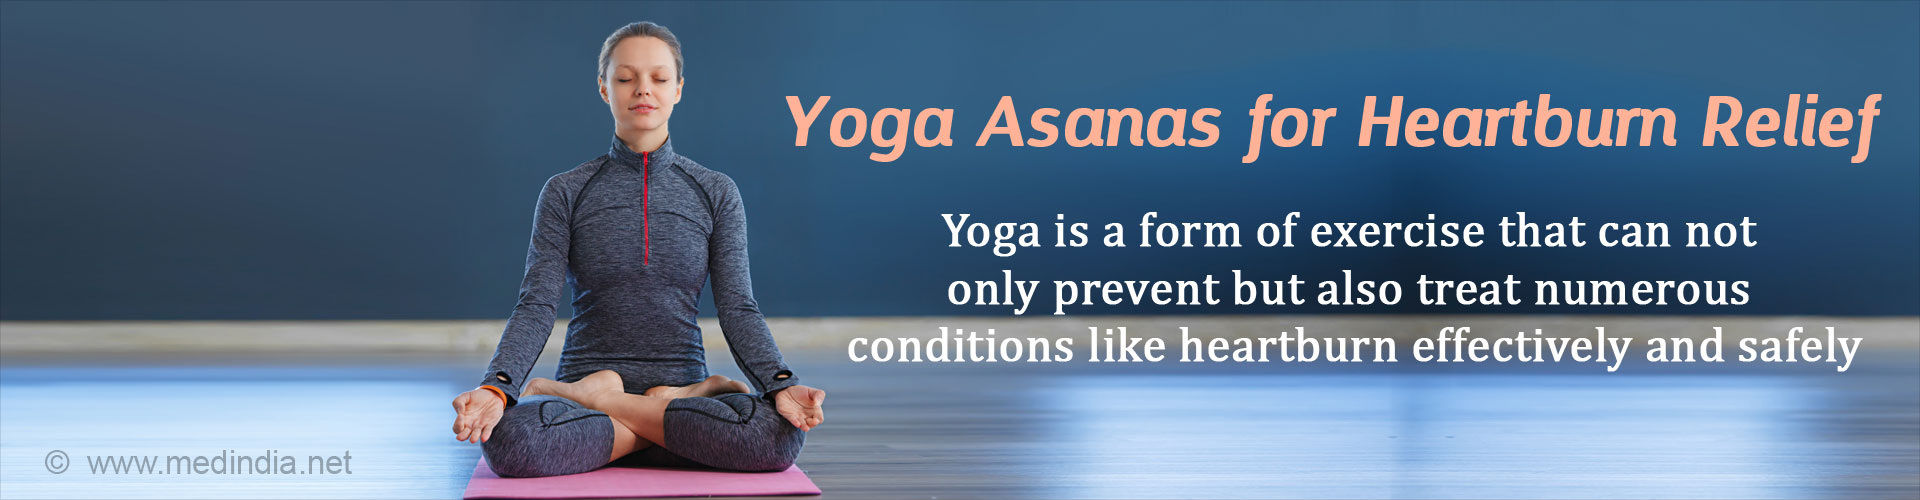 Yoga Asanas for Heartburn Relief: yoga is a form of exercise that can, not only prevent but also treat numerous conditions like heartburn effectively and safely